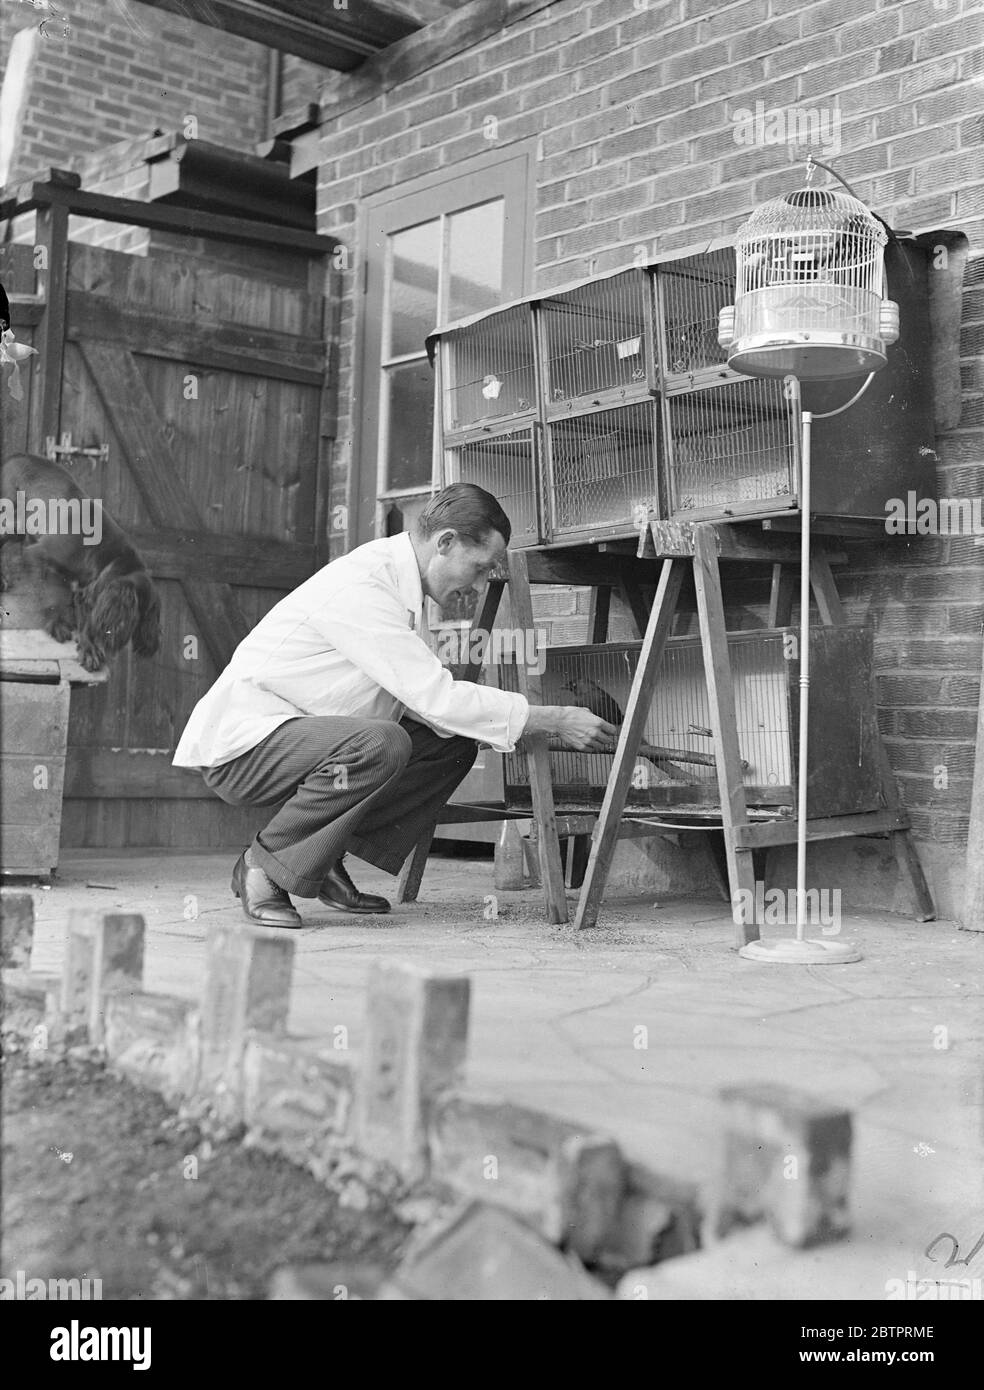 Britain's only bird surgeon. London archaeology 400 further patients in a year. More than 400 birds had been treated and cured in a year by Britain's only practising 'Bird surgeon', Mr a B Andrae of Morton Way, Southgate. At the back of Mr Andrea house is a room equipped for every kind of operation. In this room, birds had been treated for broken limbs, damaged wings and internal complaints. A few days ago, Mr Andrae cut a cancer growth from a bird. The operations are performed with dental instruments, and Mrs Andrea acts as anaesthetist. There is a specially heated 'Ward 'for serious cases. M Stock Photo